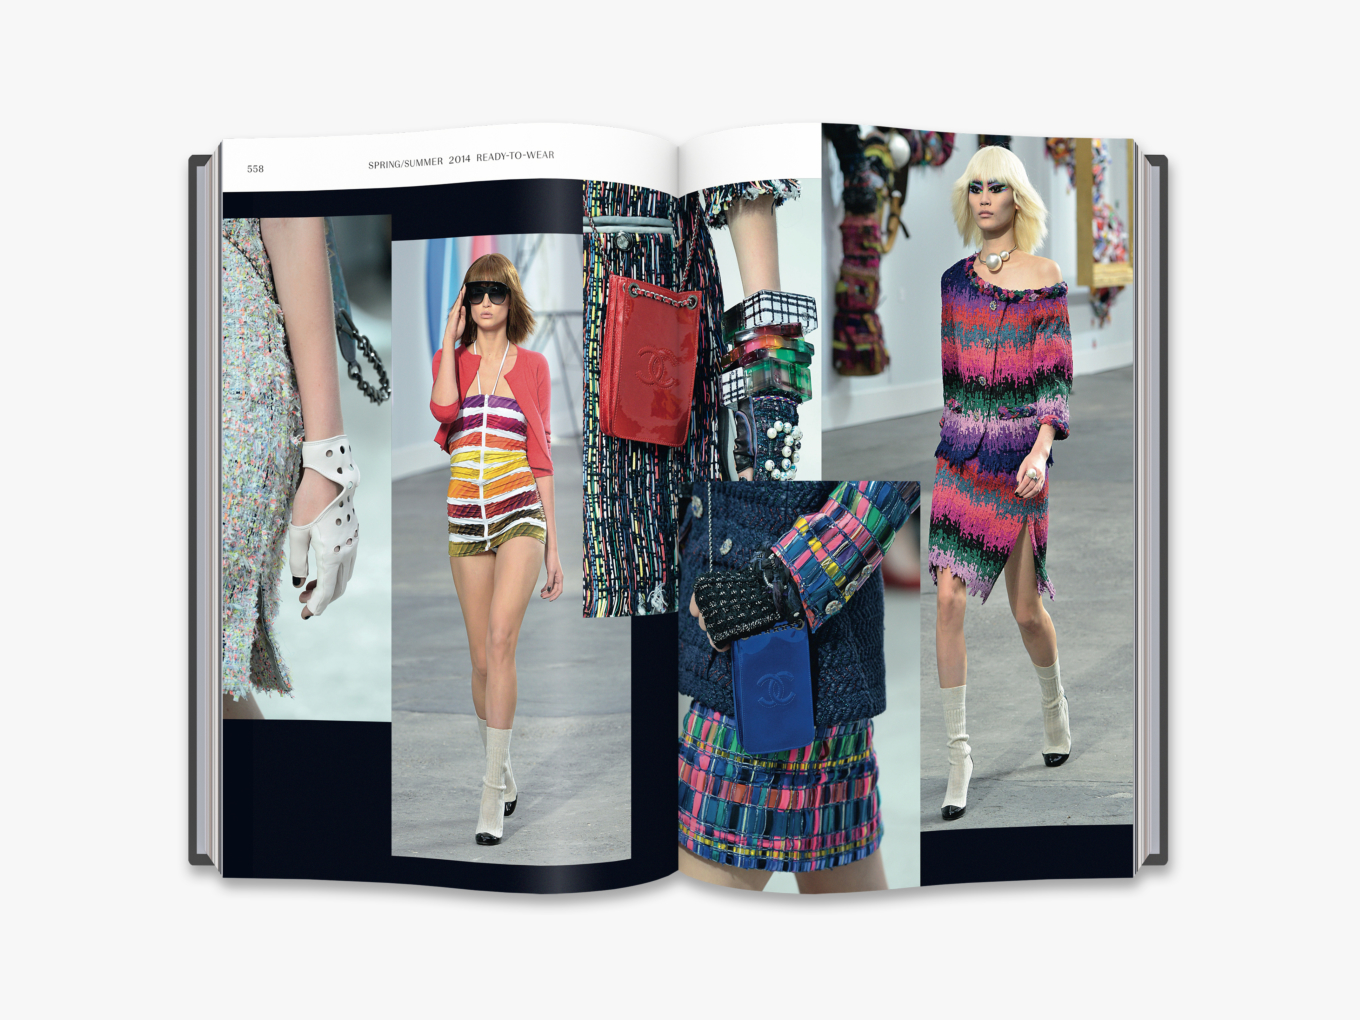 From Chanel Catwalk: The Complete Karl Lagerfeld Collections copyright Thames & Hudson 2016